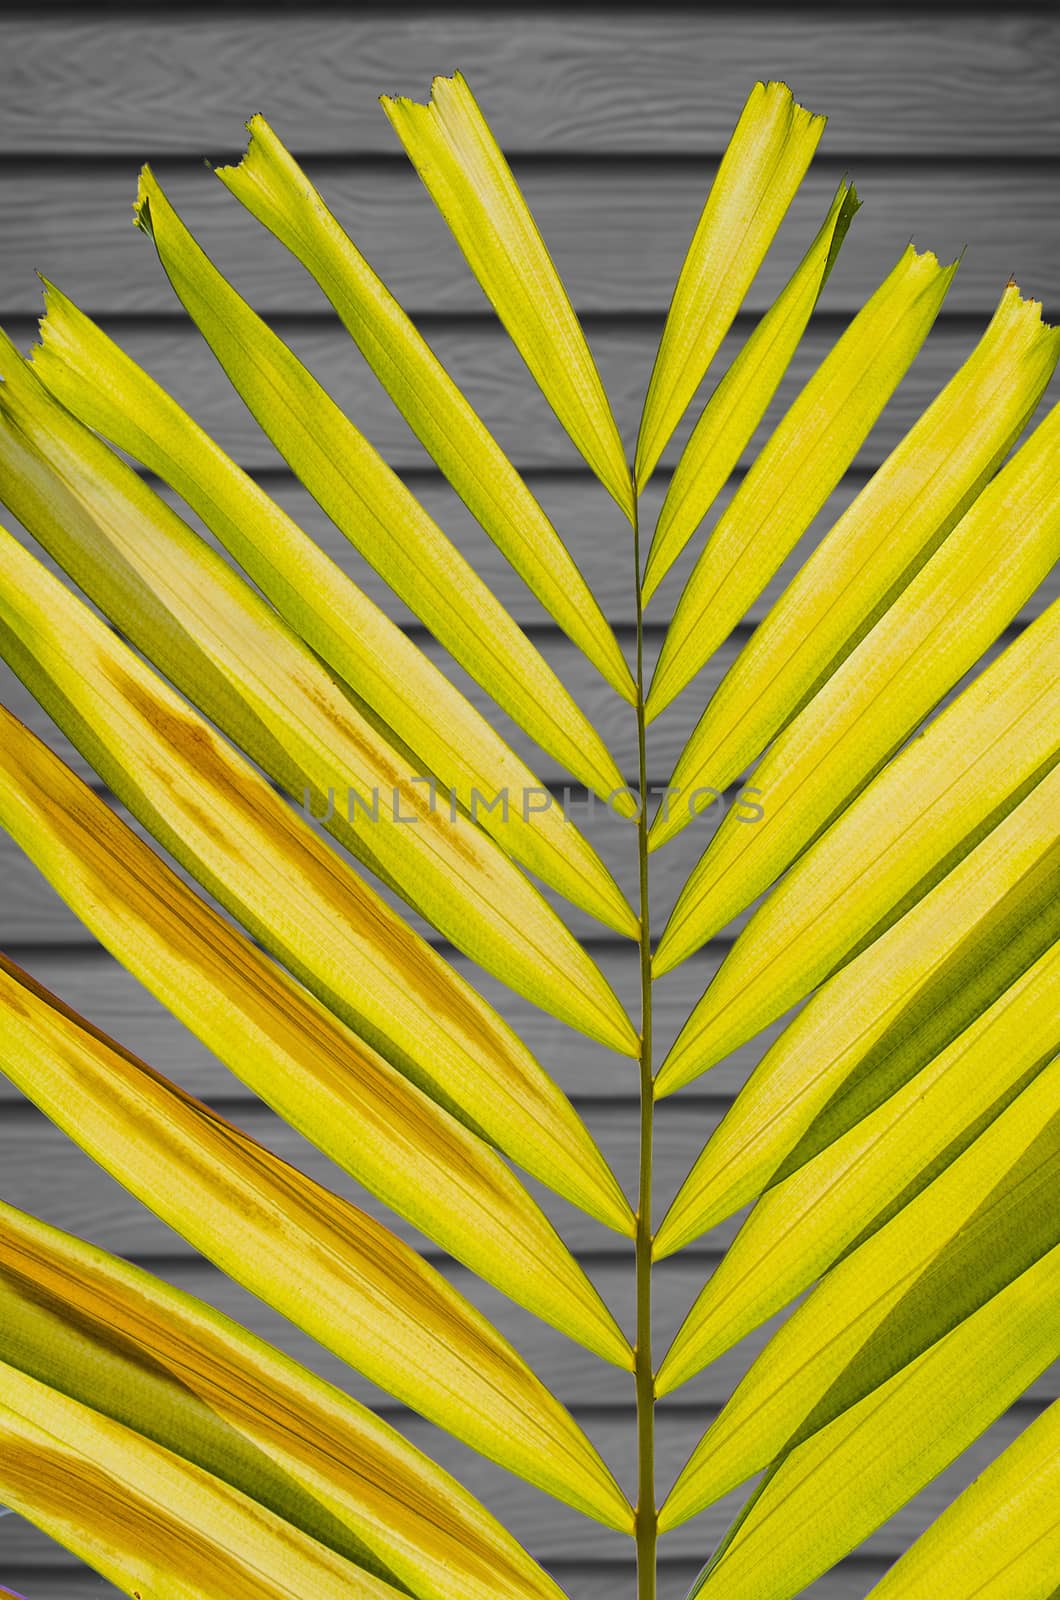 The Petal Palm Leaf on Desaturate Wooden Wall Background